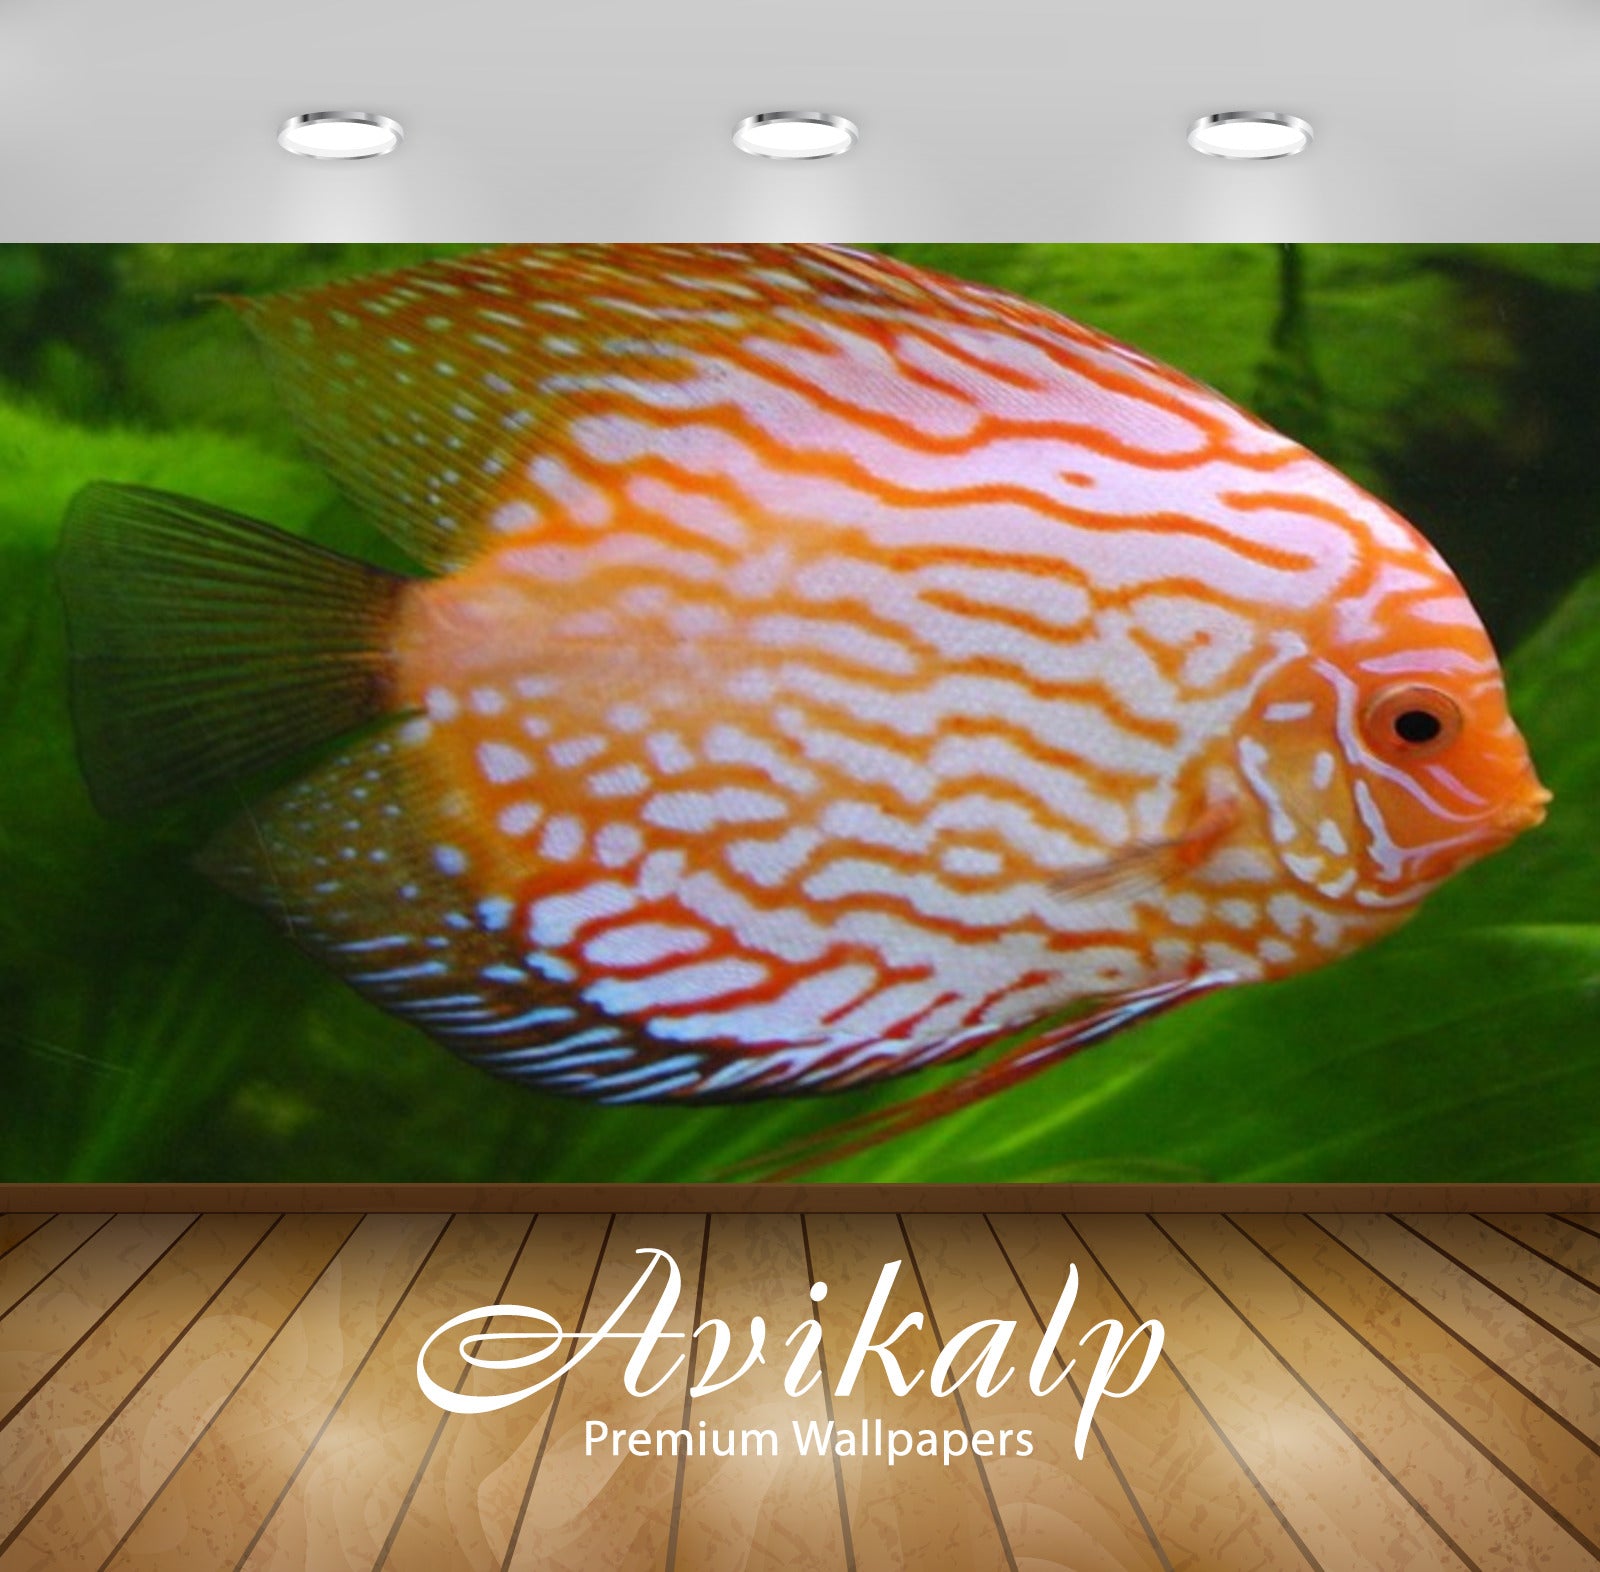 Avikalp Exclusive Awi2560 Diskus Tropical Fish Full HD Wallpapers for Living room, Hall, Kids Room,